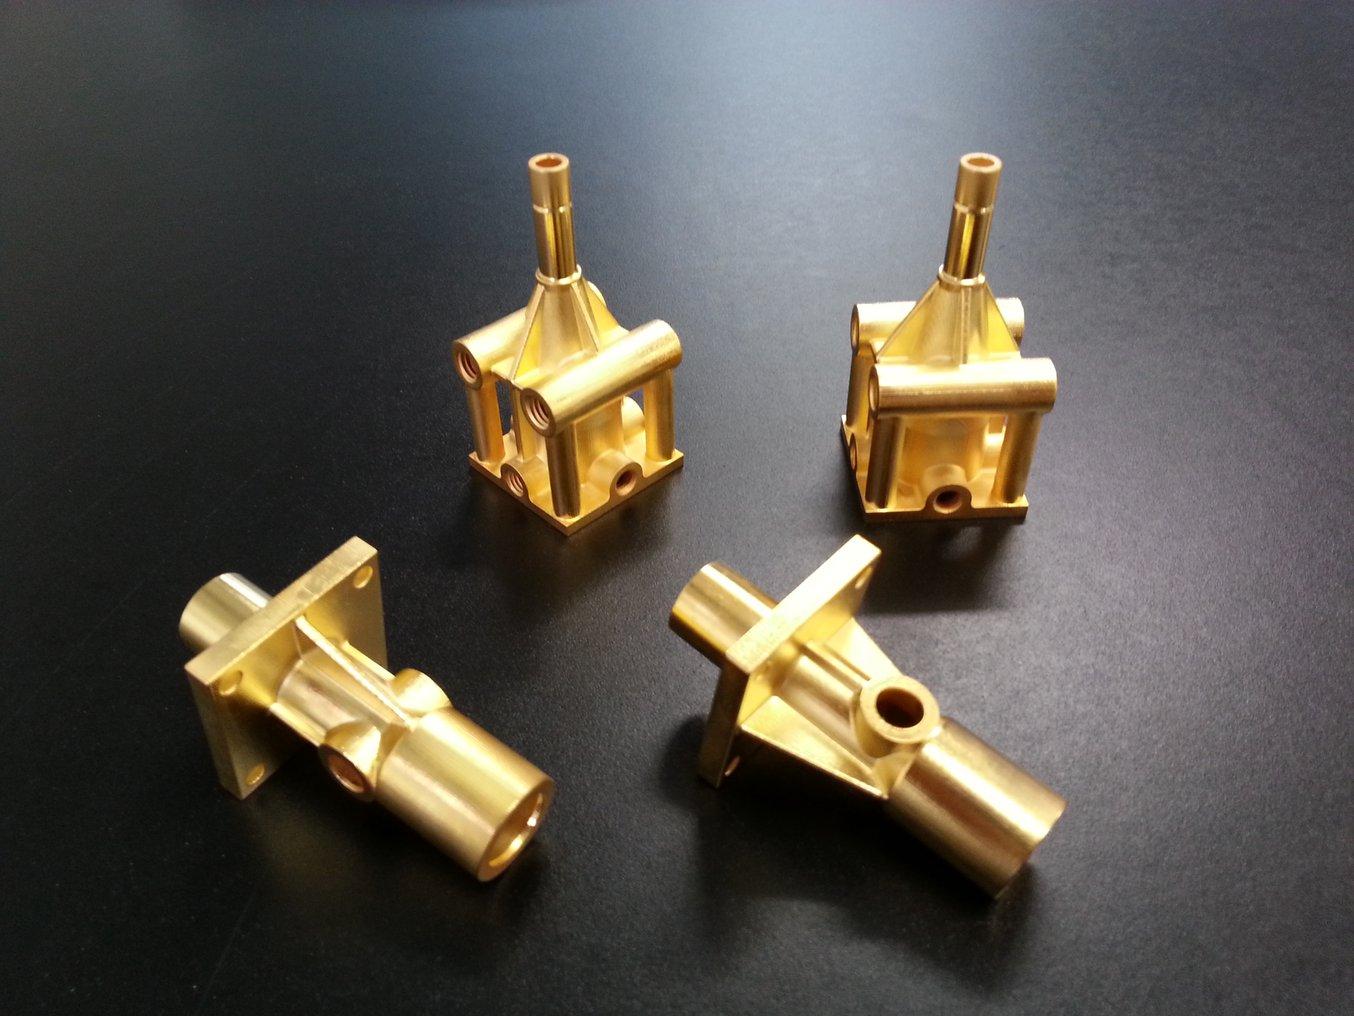 3D printed parts in gold, electroplated by the Swiss company Galvotec, one of few in the world specializing in metal coating for rapid prototyping.